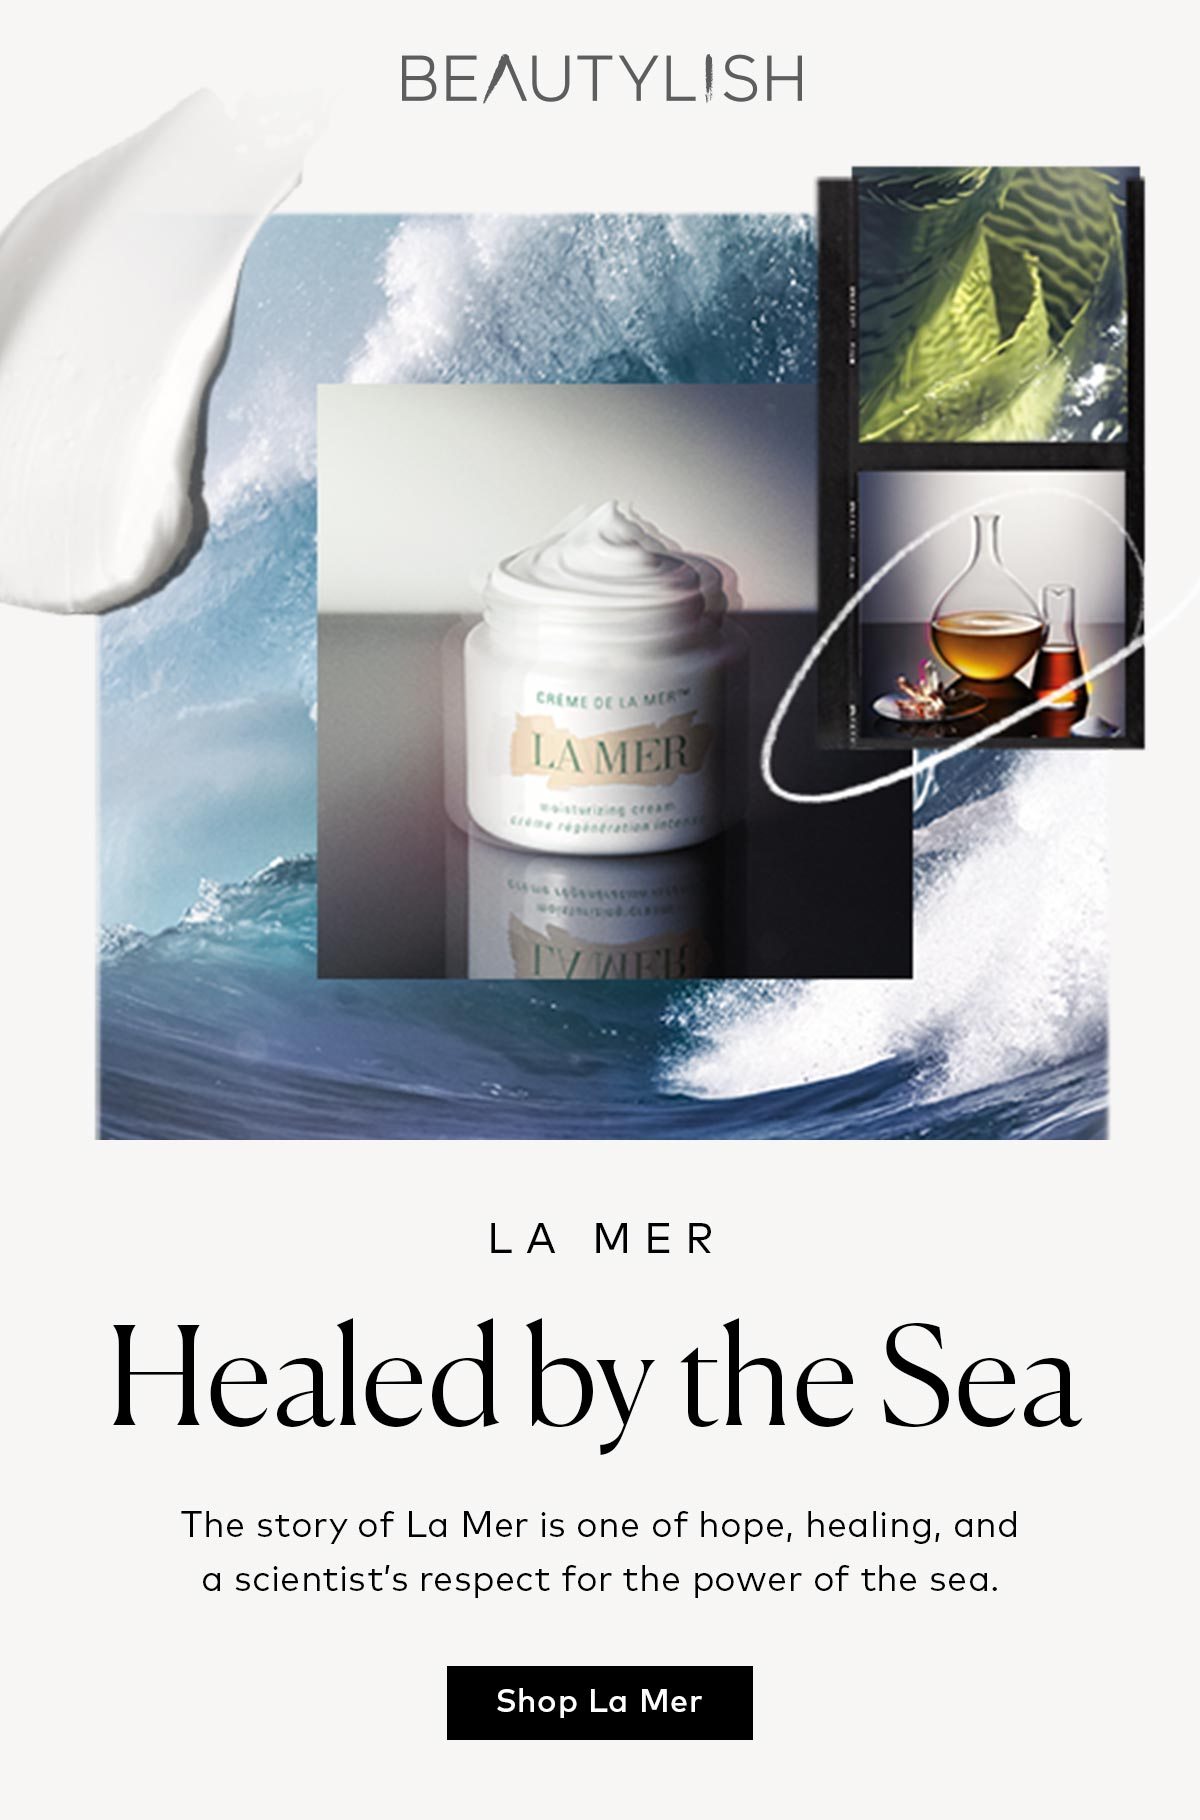 It's here: Discover La Mer now - Beautylish Email Archive